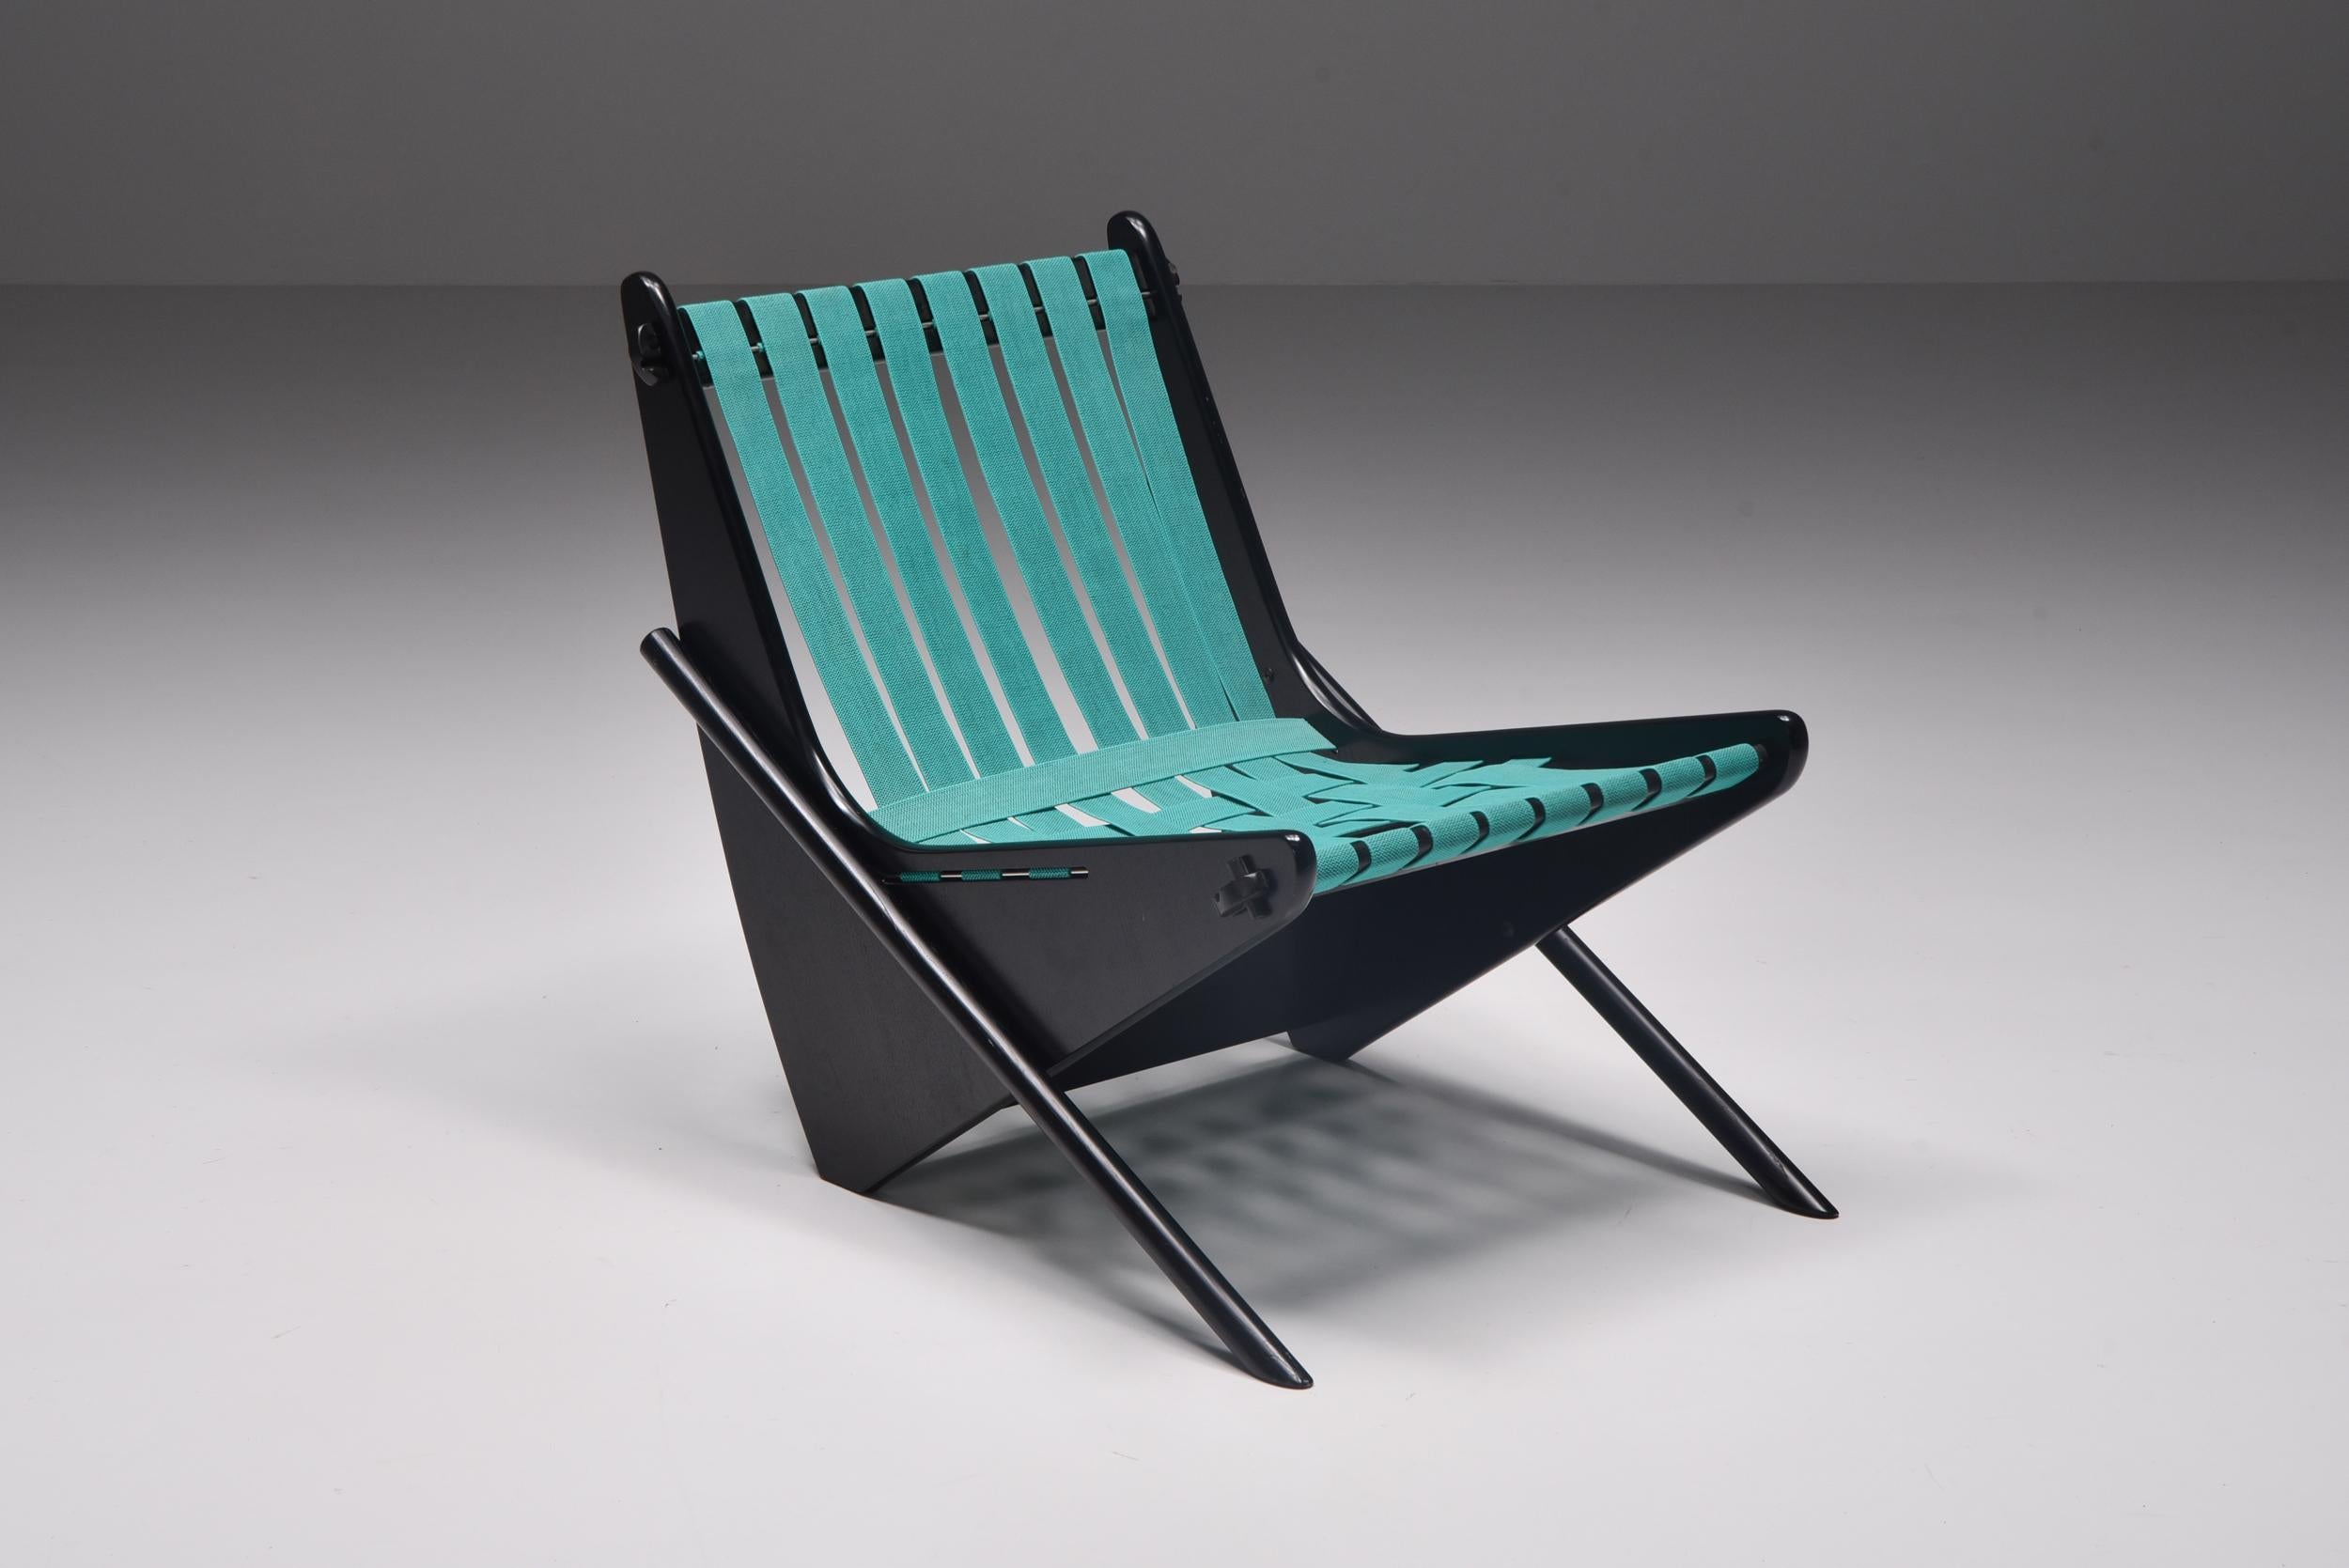 Richard Neutra; Furniture by Architects; Modernist; Los Angeles Times; Miller House; Brazillian Design; Bona SRL Italy; 1980s; Modern; Boomerang Lounge Chair; 

Richard Neutra's Boomerang lounge was designed in Brazil. This limited edition chair was